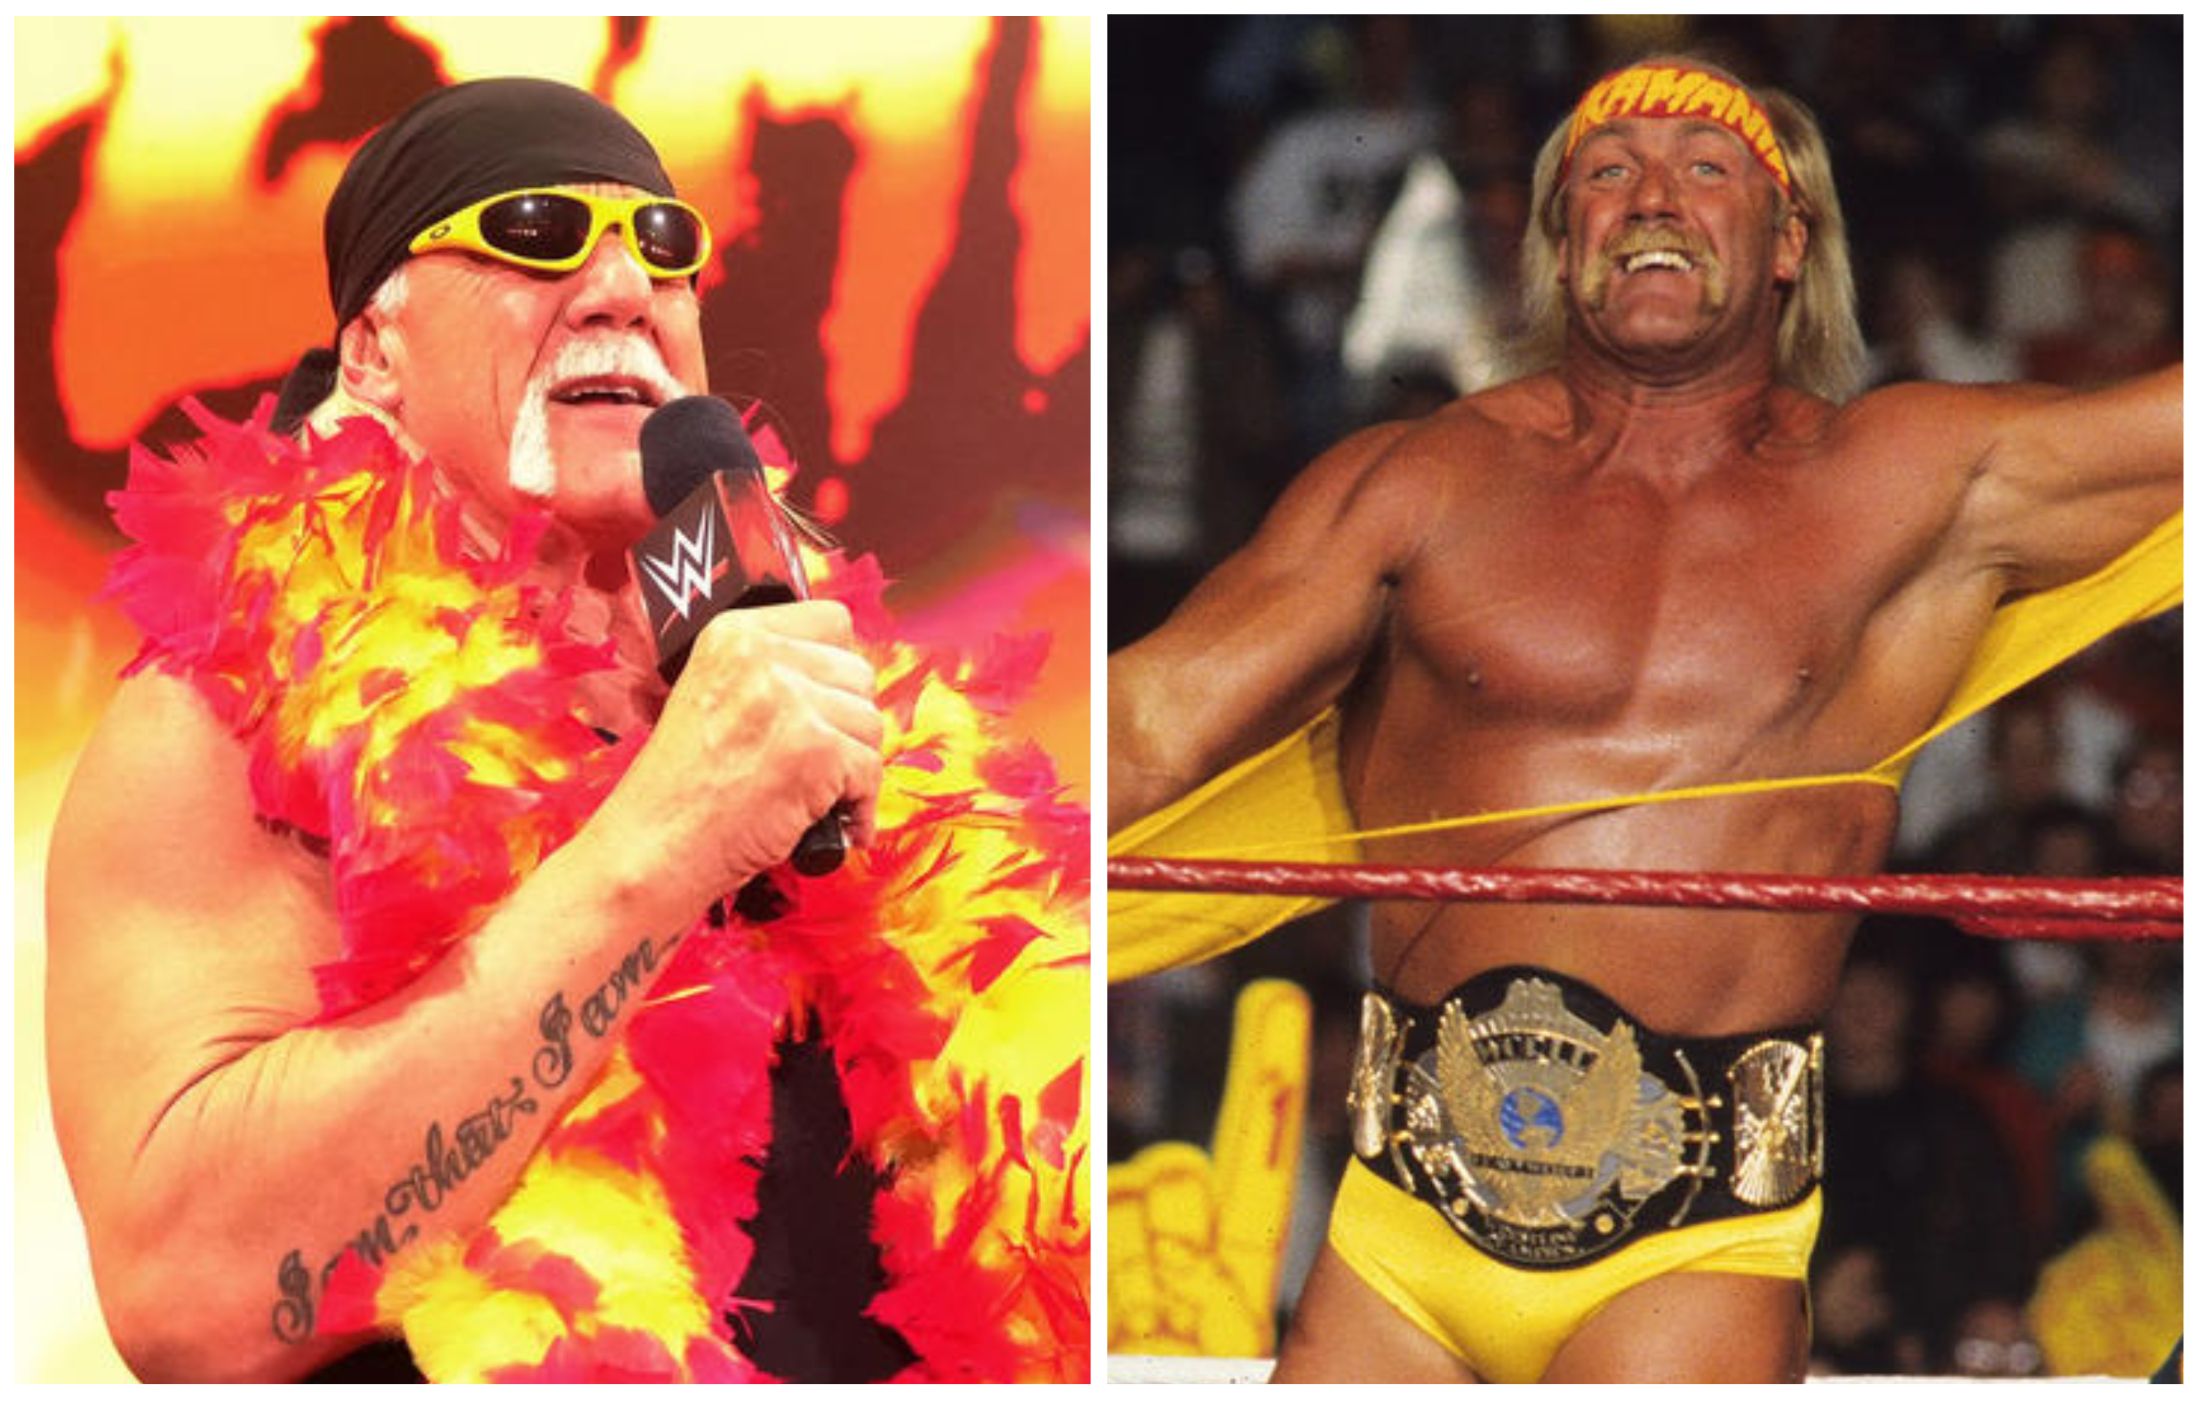 WWE: Hulk Hogan hilariously posts embarrassing private message on Twitter